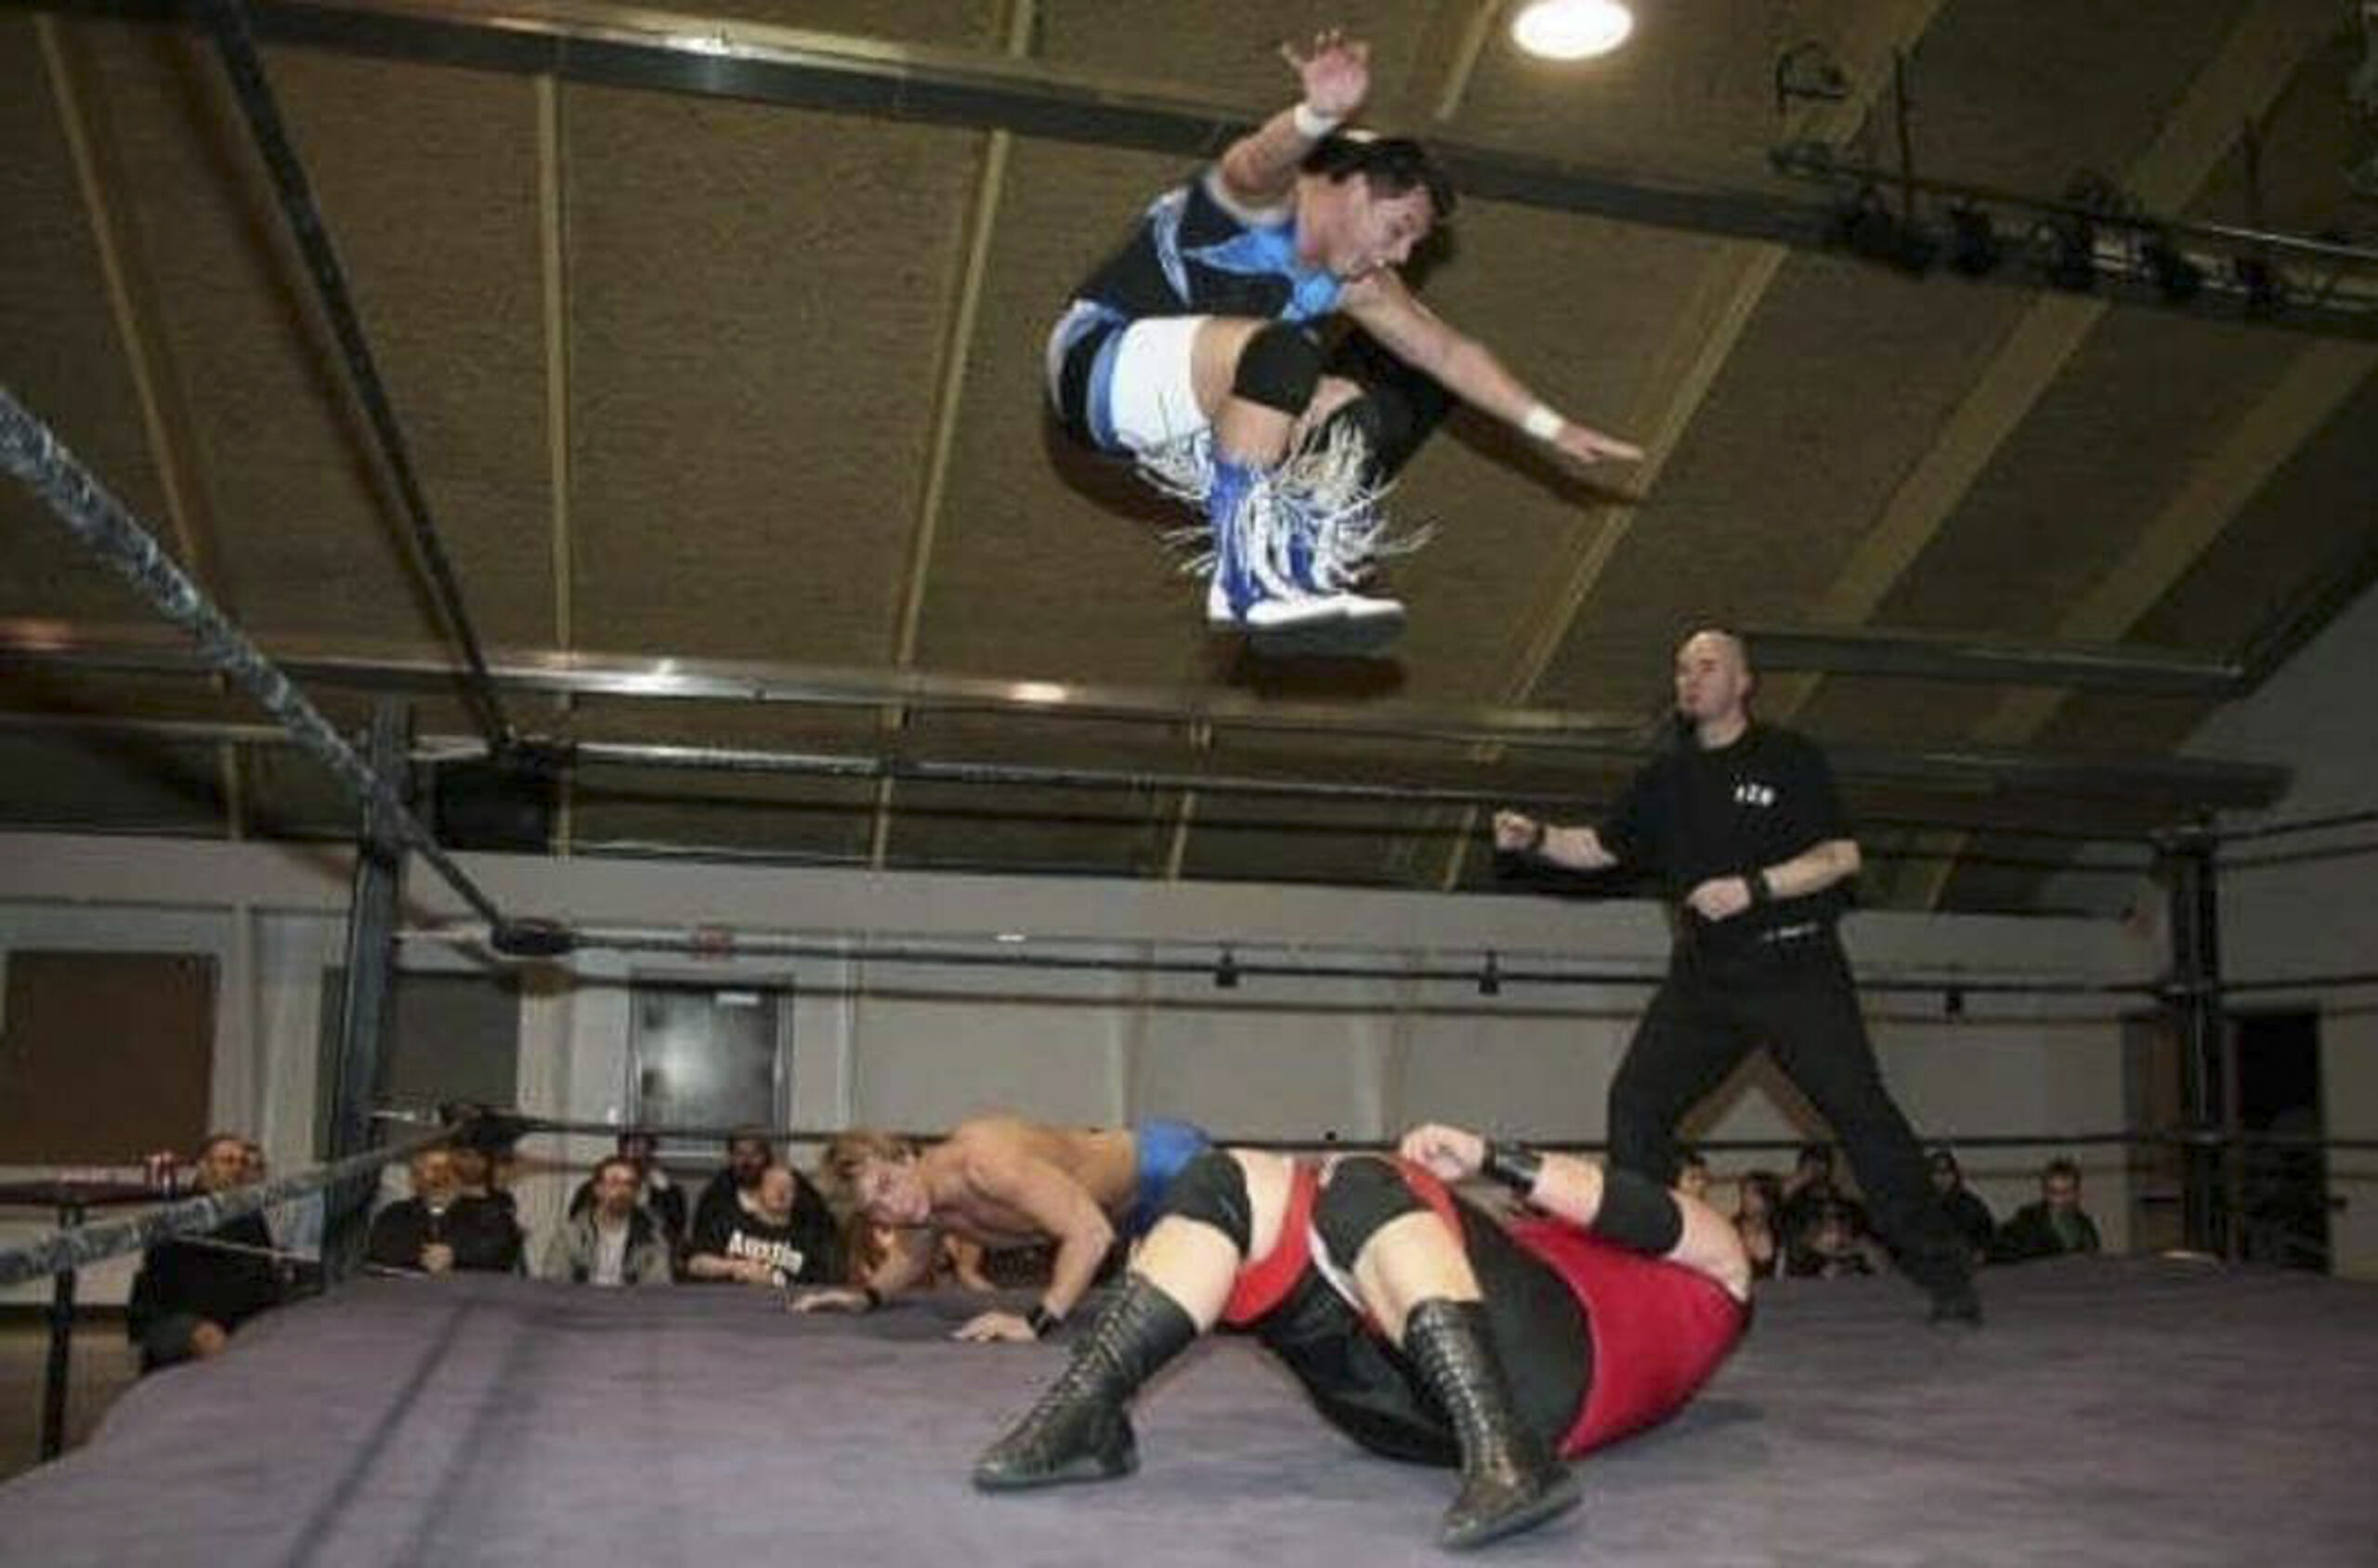 Stefan Richard in mid-air after flying off the top rope.